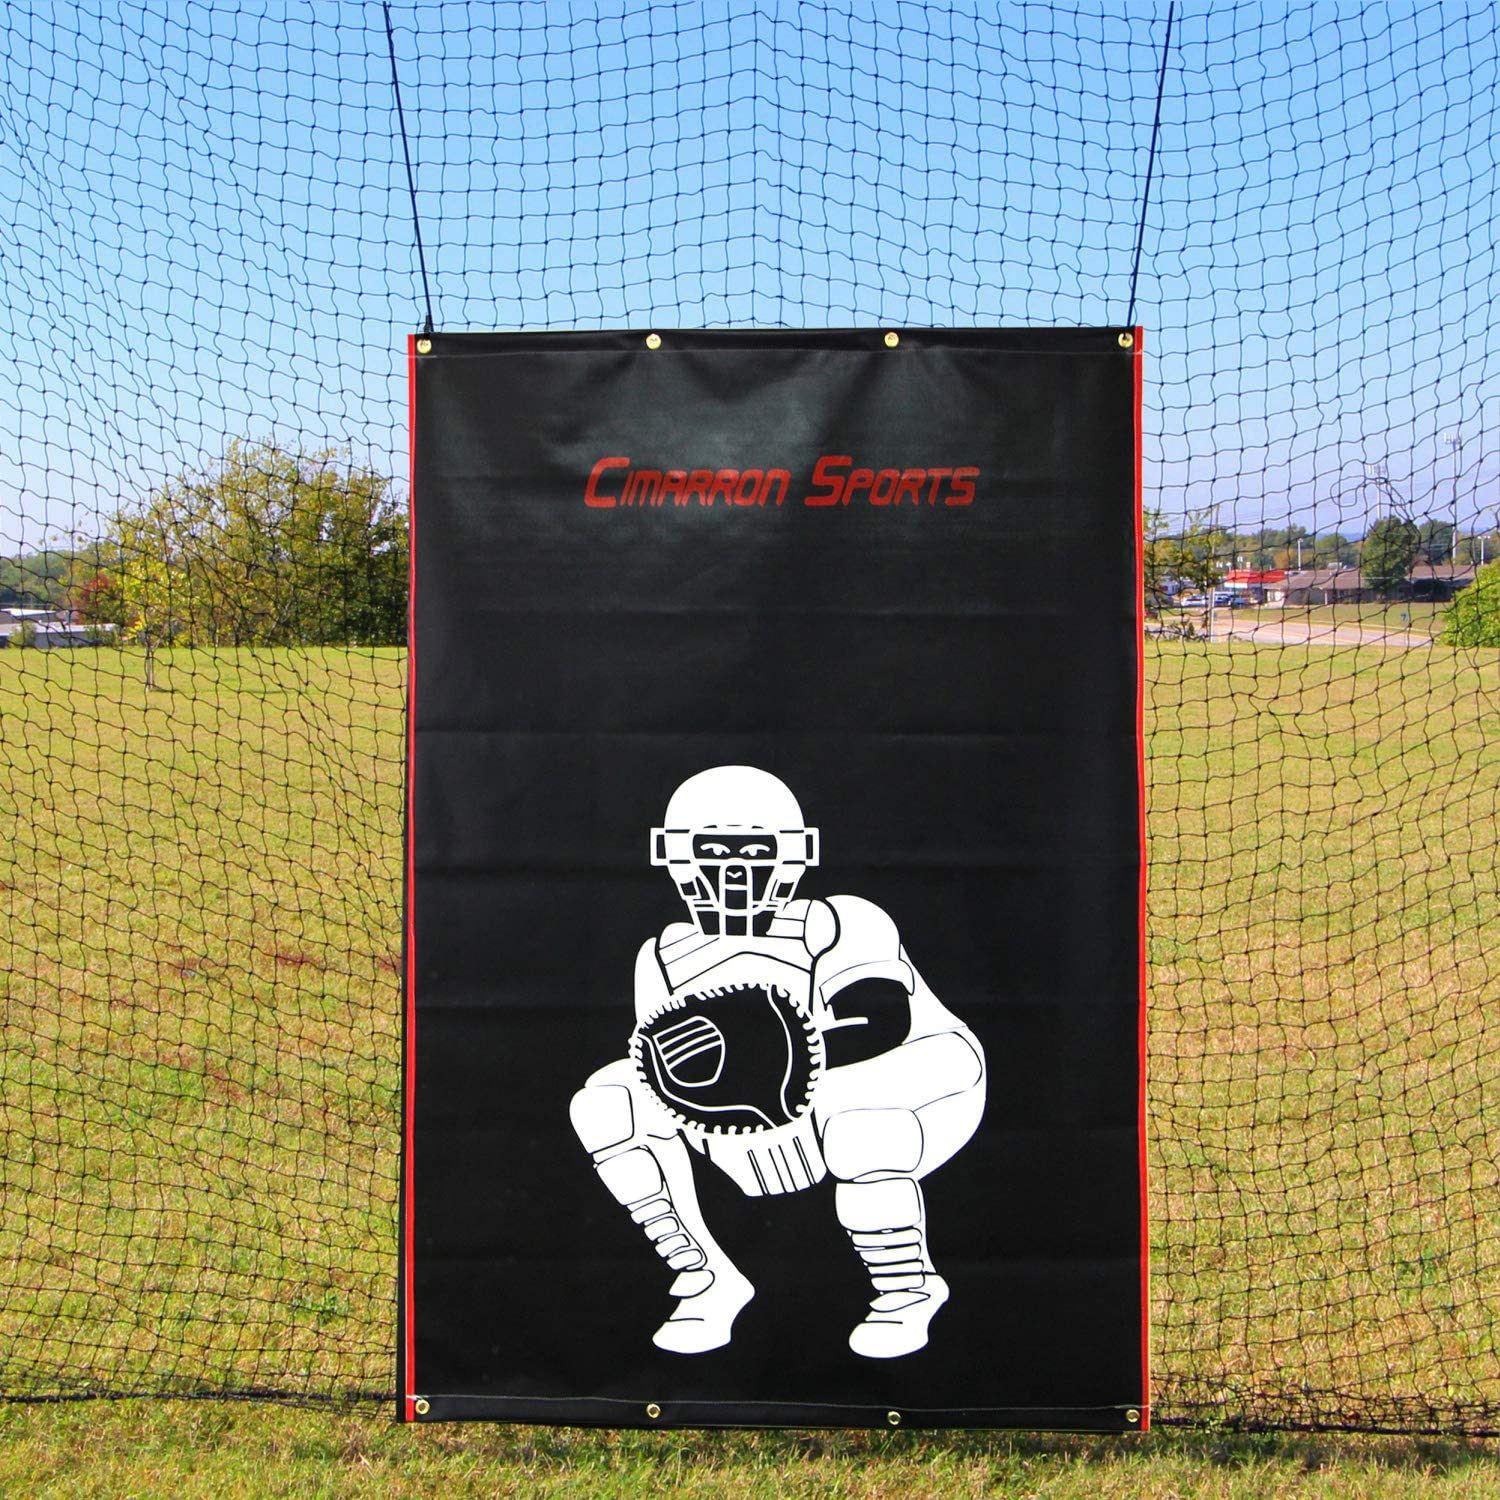 Cimarron Sports 4 x 6 Foot Baseball Softball Pitcher Training Aid Practice Batting Cage Net Vinyl Backstop with Catcher Image, Backstop Only